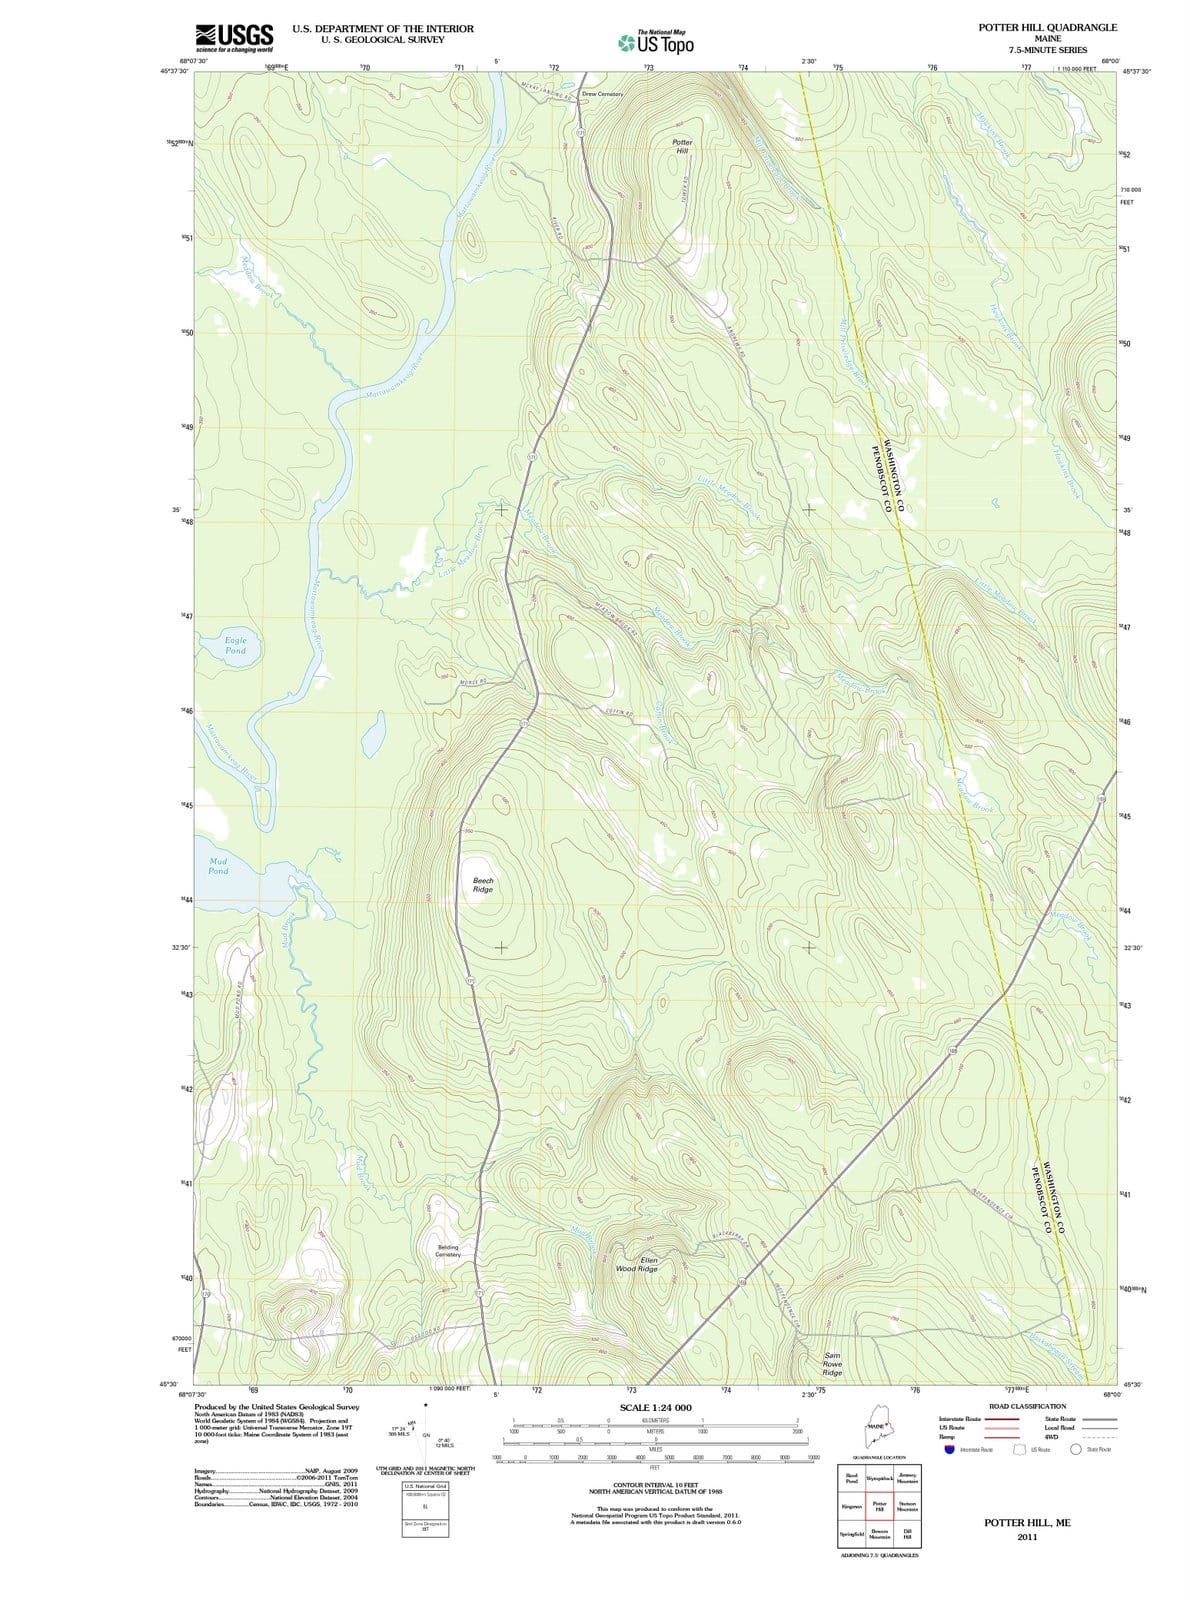 2011 Potter Hill, ME - Maine - USGS Topographic Map